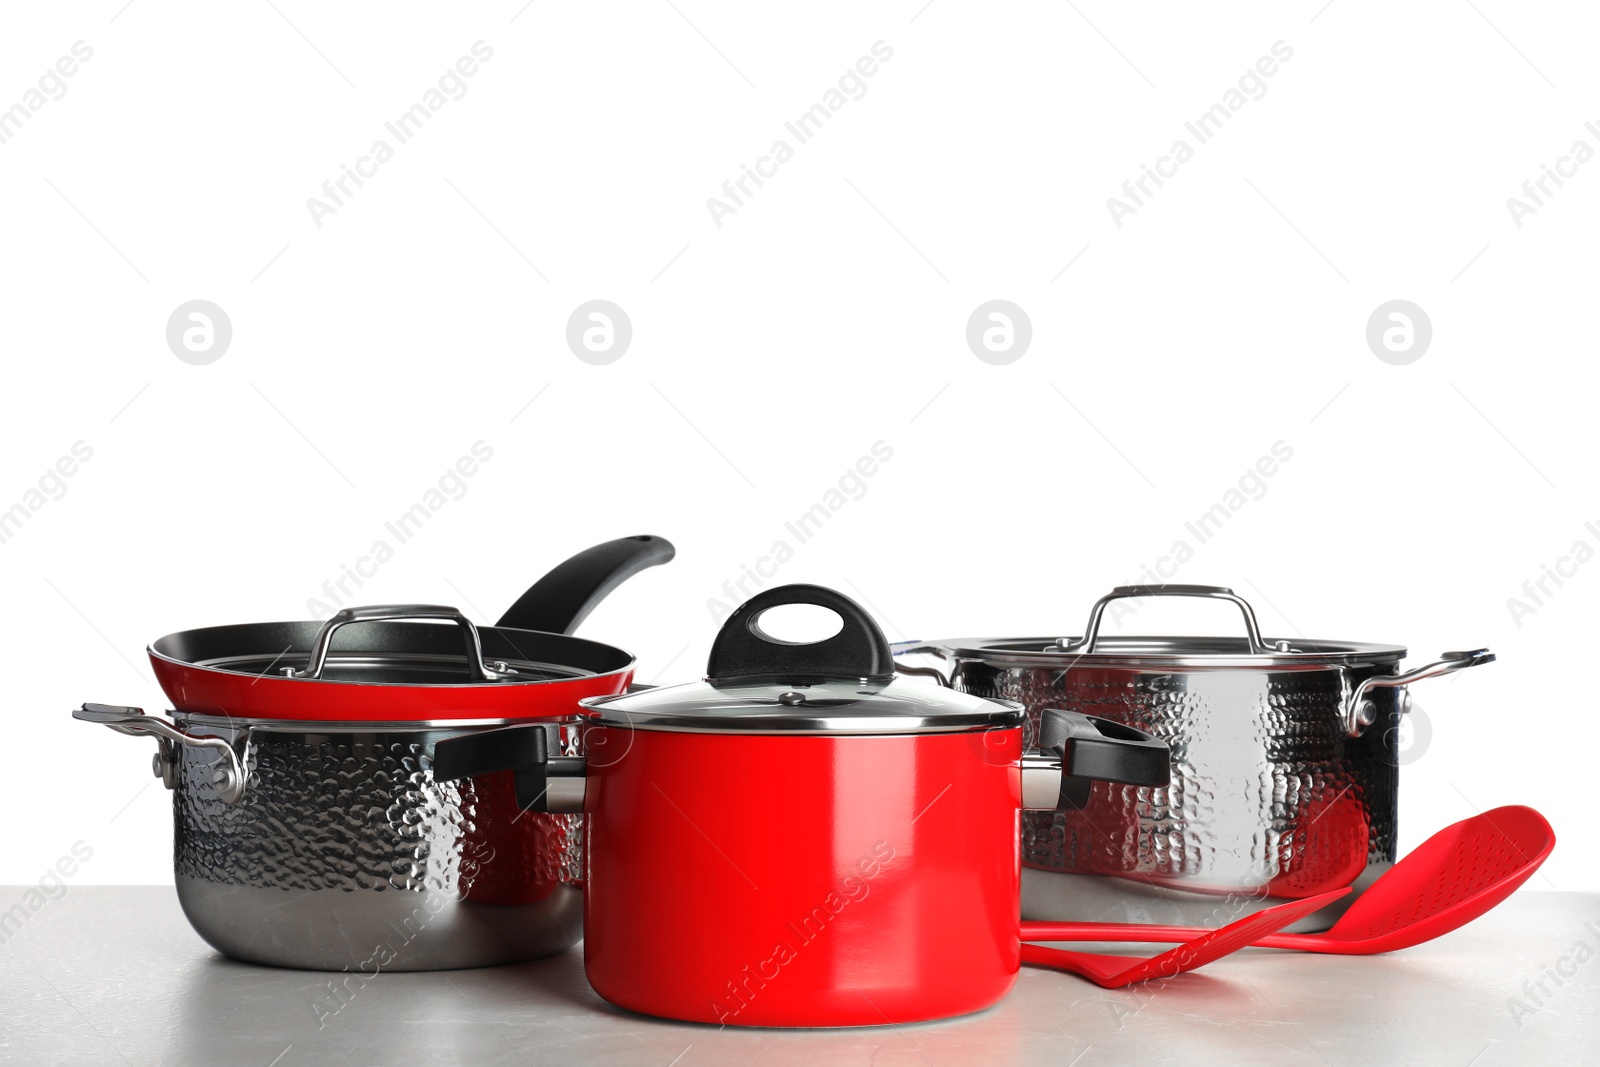 Photo of Set of clean cookware and utensils on table against white background, space for text